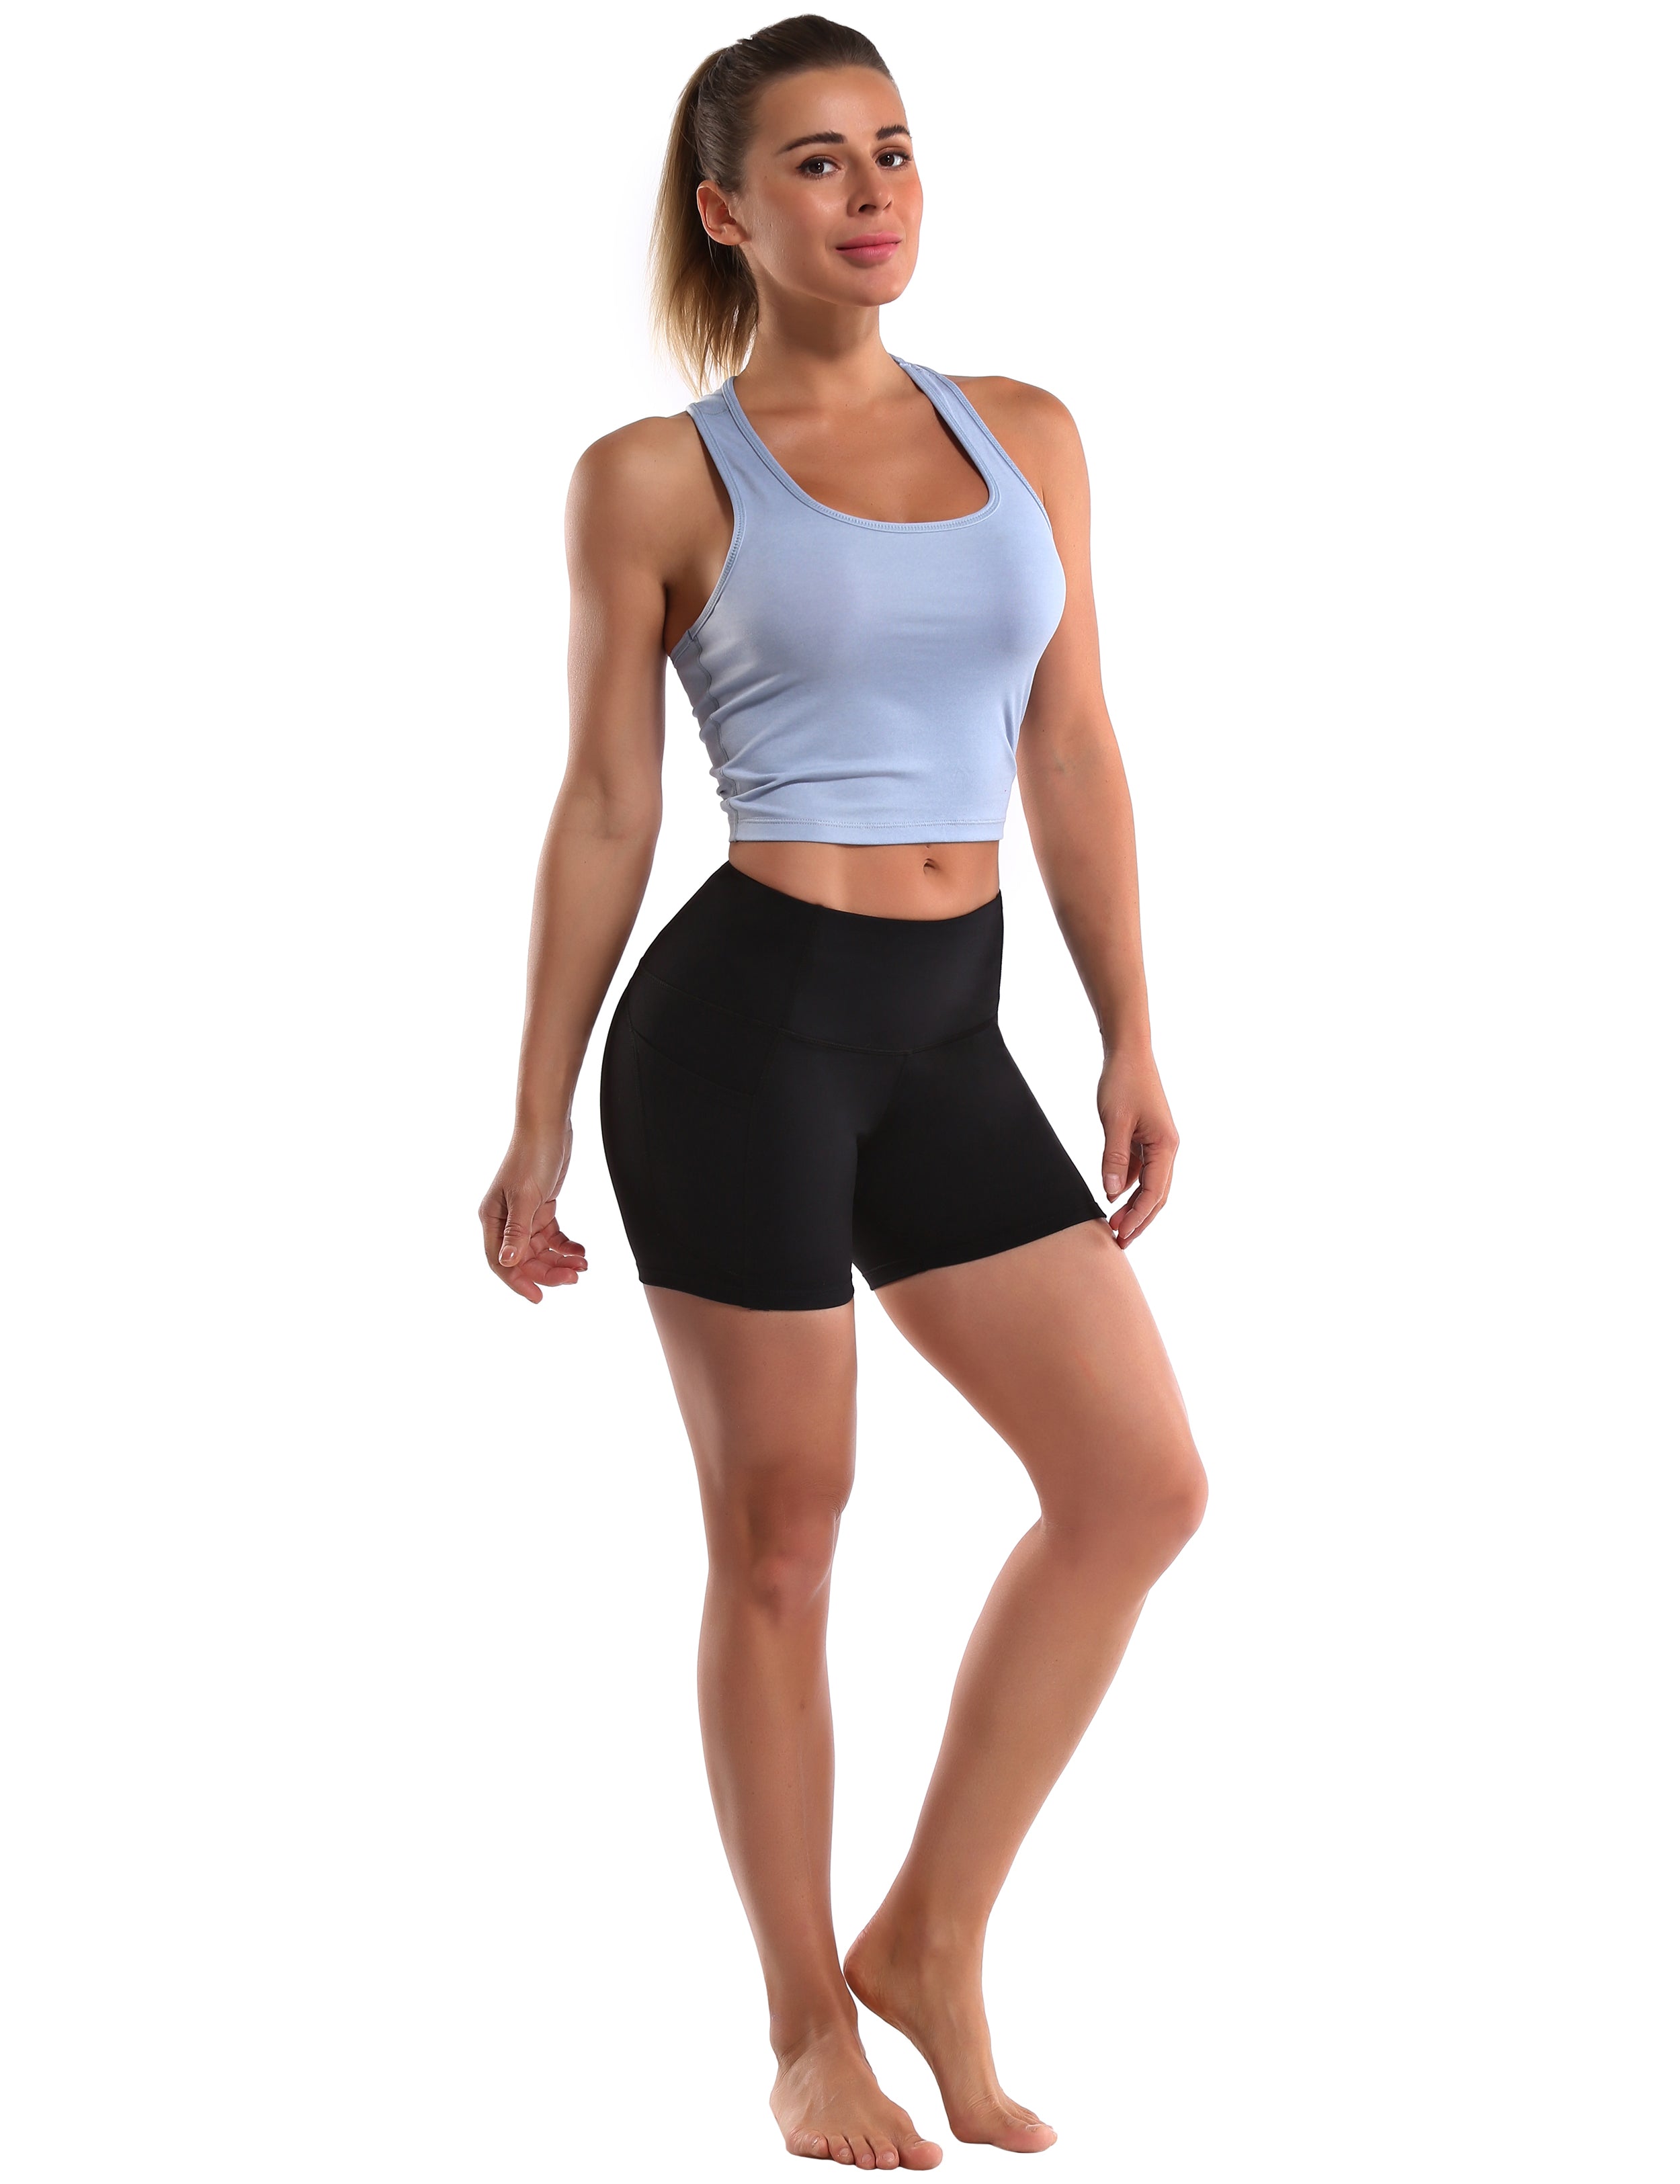 High Waist Side Pockets Yoga Shorts black Softest-ever fabric High elasticity 4-way stretch Fabric doesn't attract lint easily No see-through Moisture-wicking Machine wash 88% Nylon, 12% Spandex